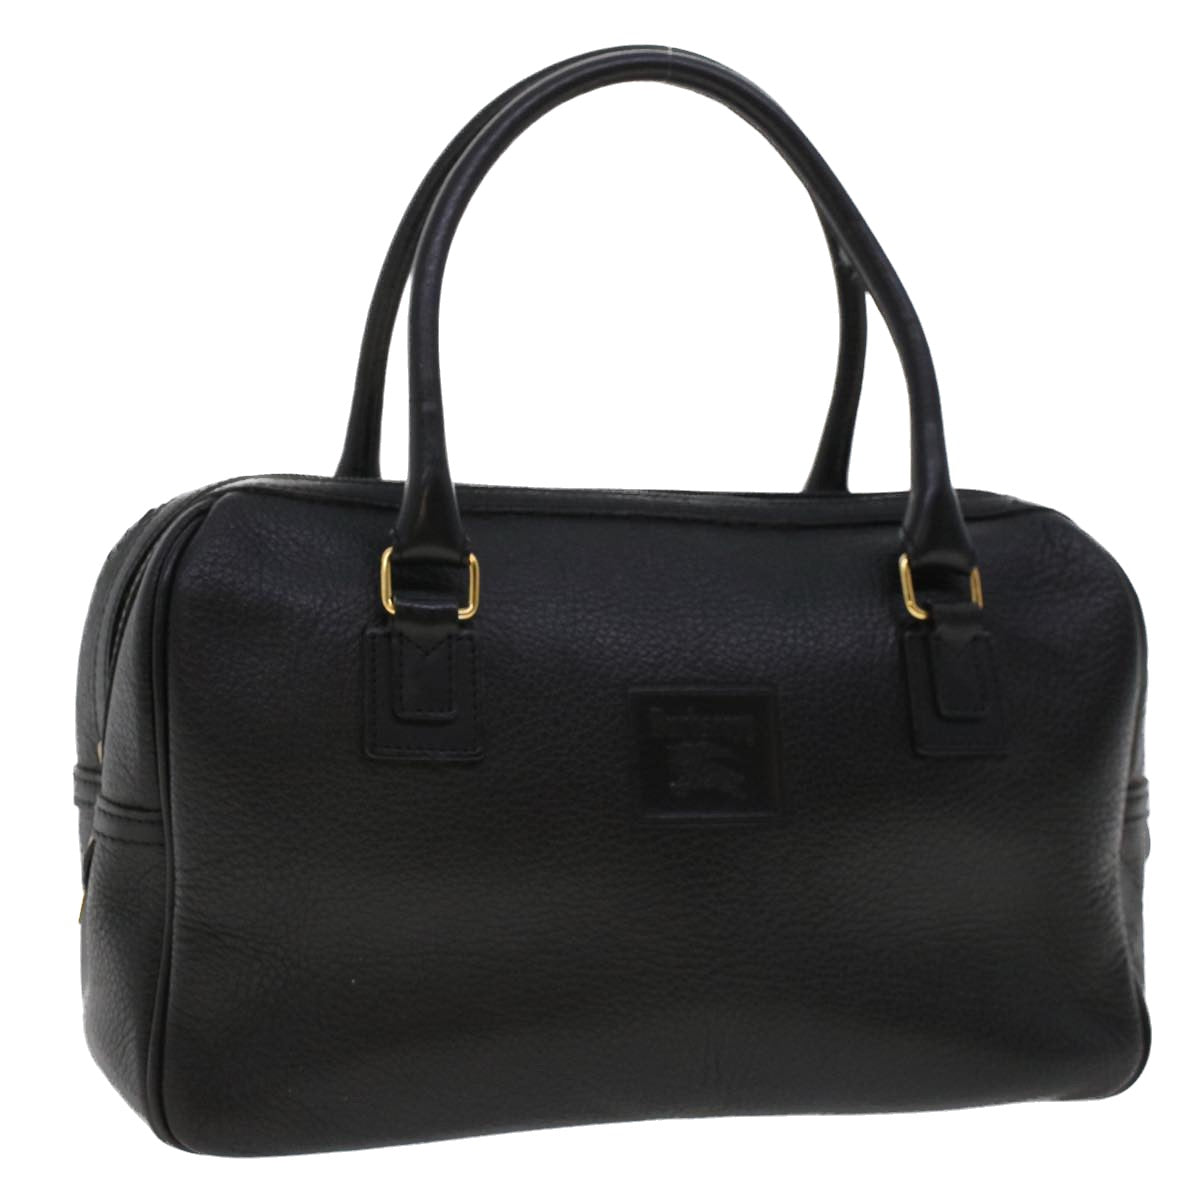 Burberrys Hand Bag Leather Black Auth bs5874